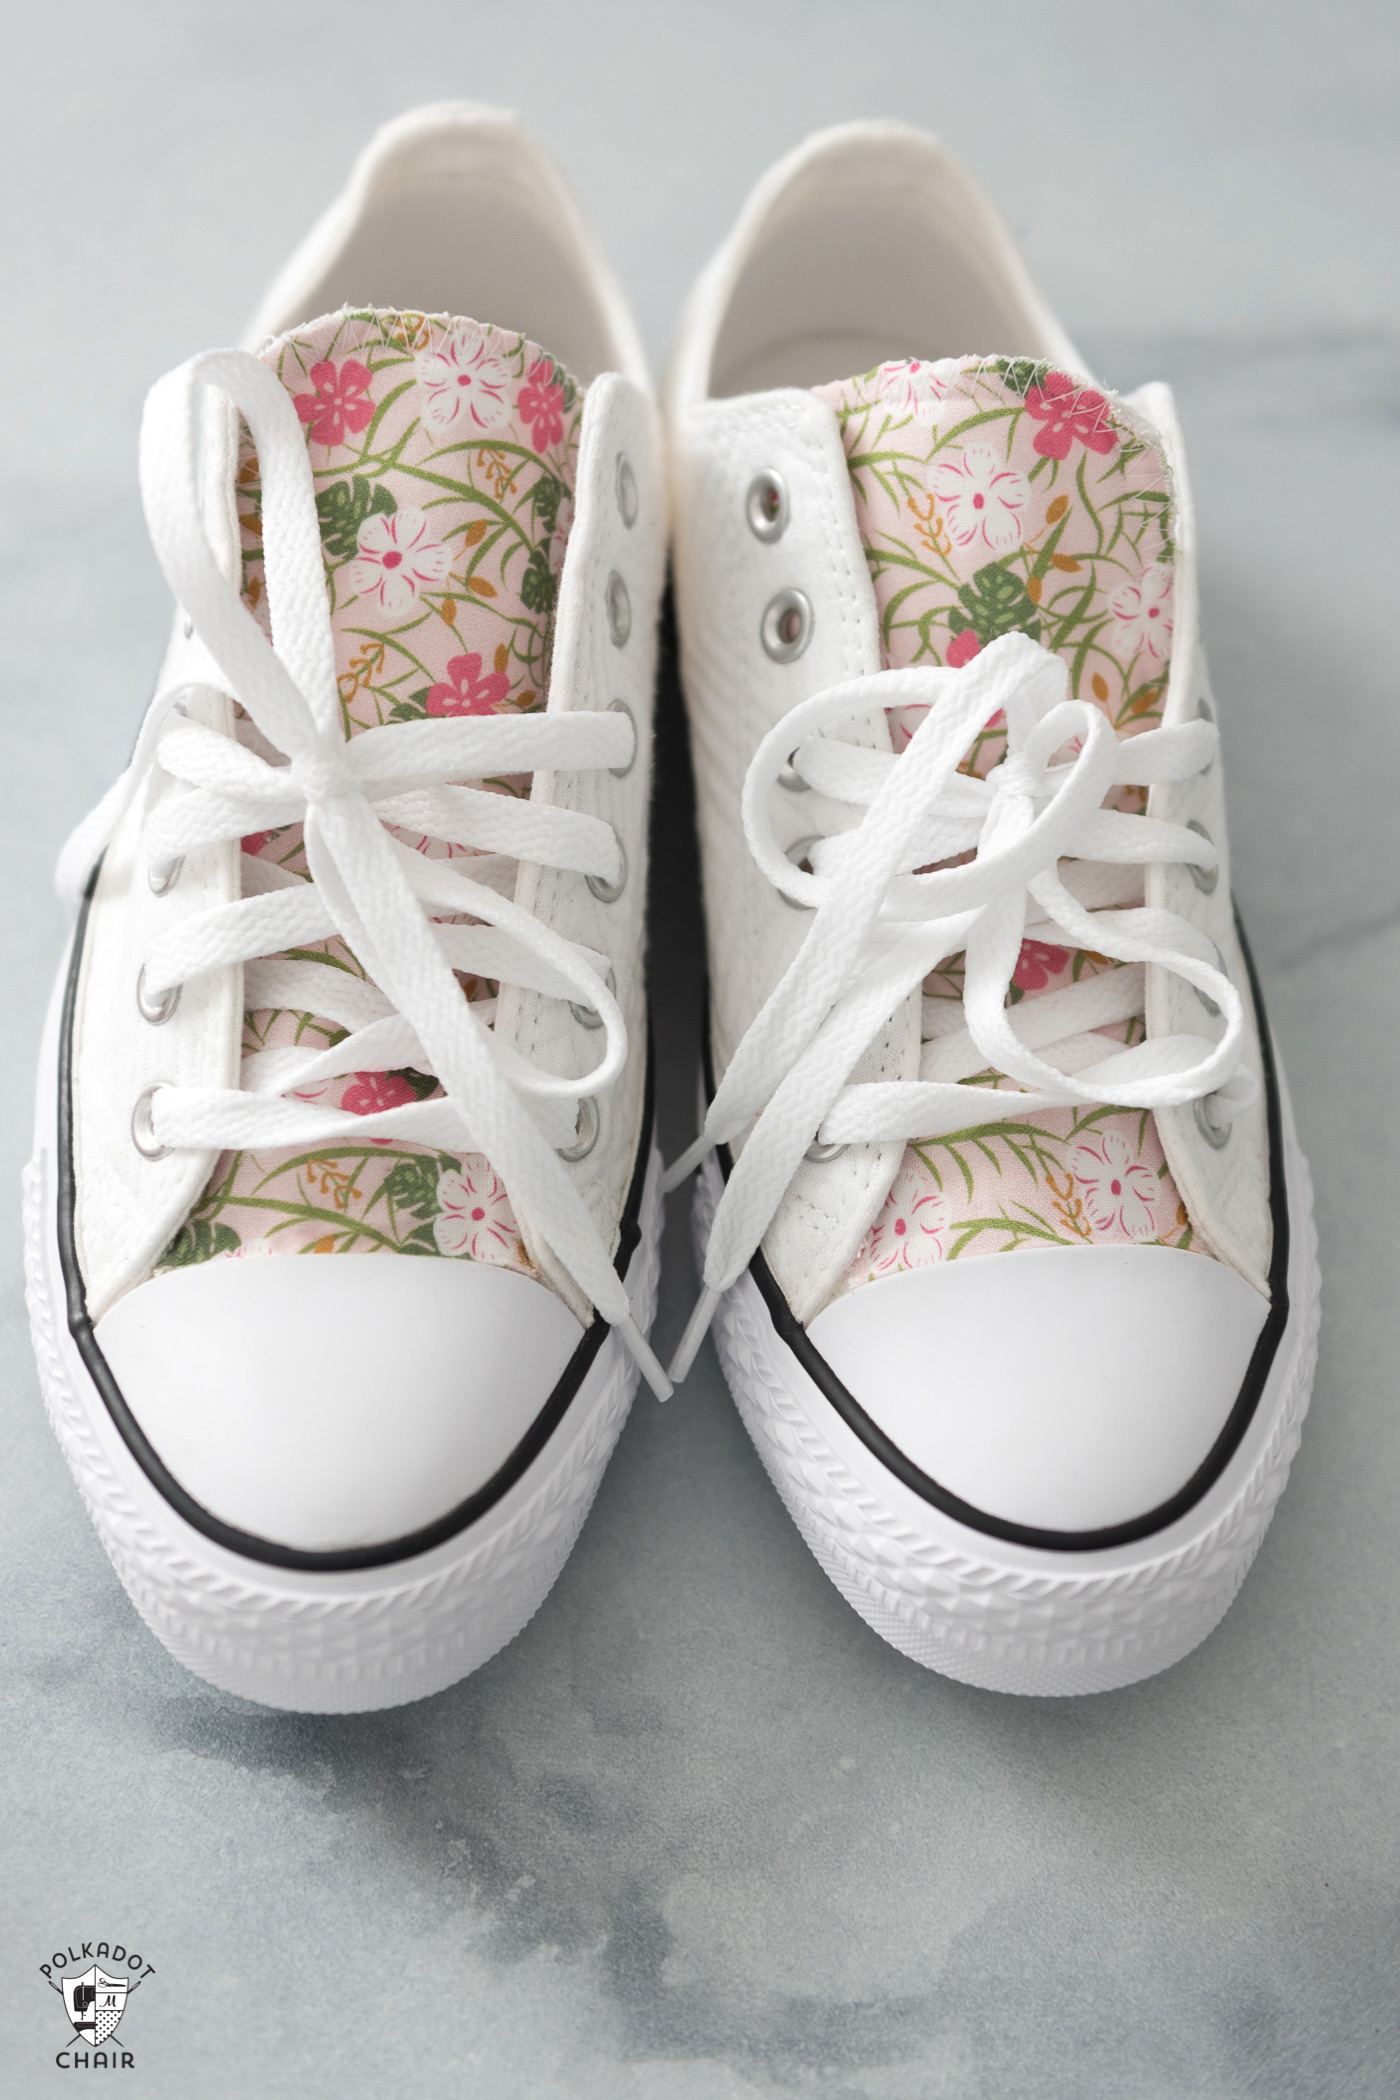 customize your own converse